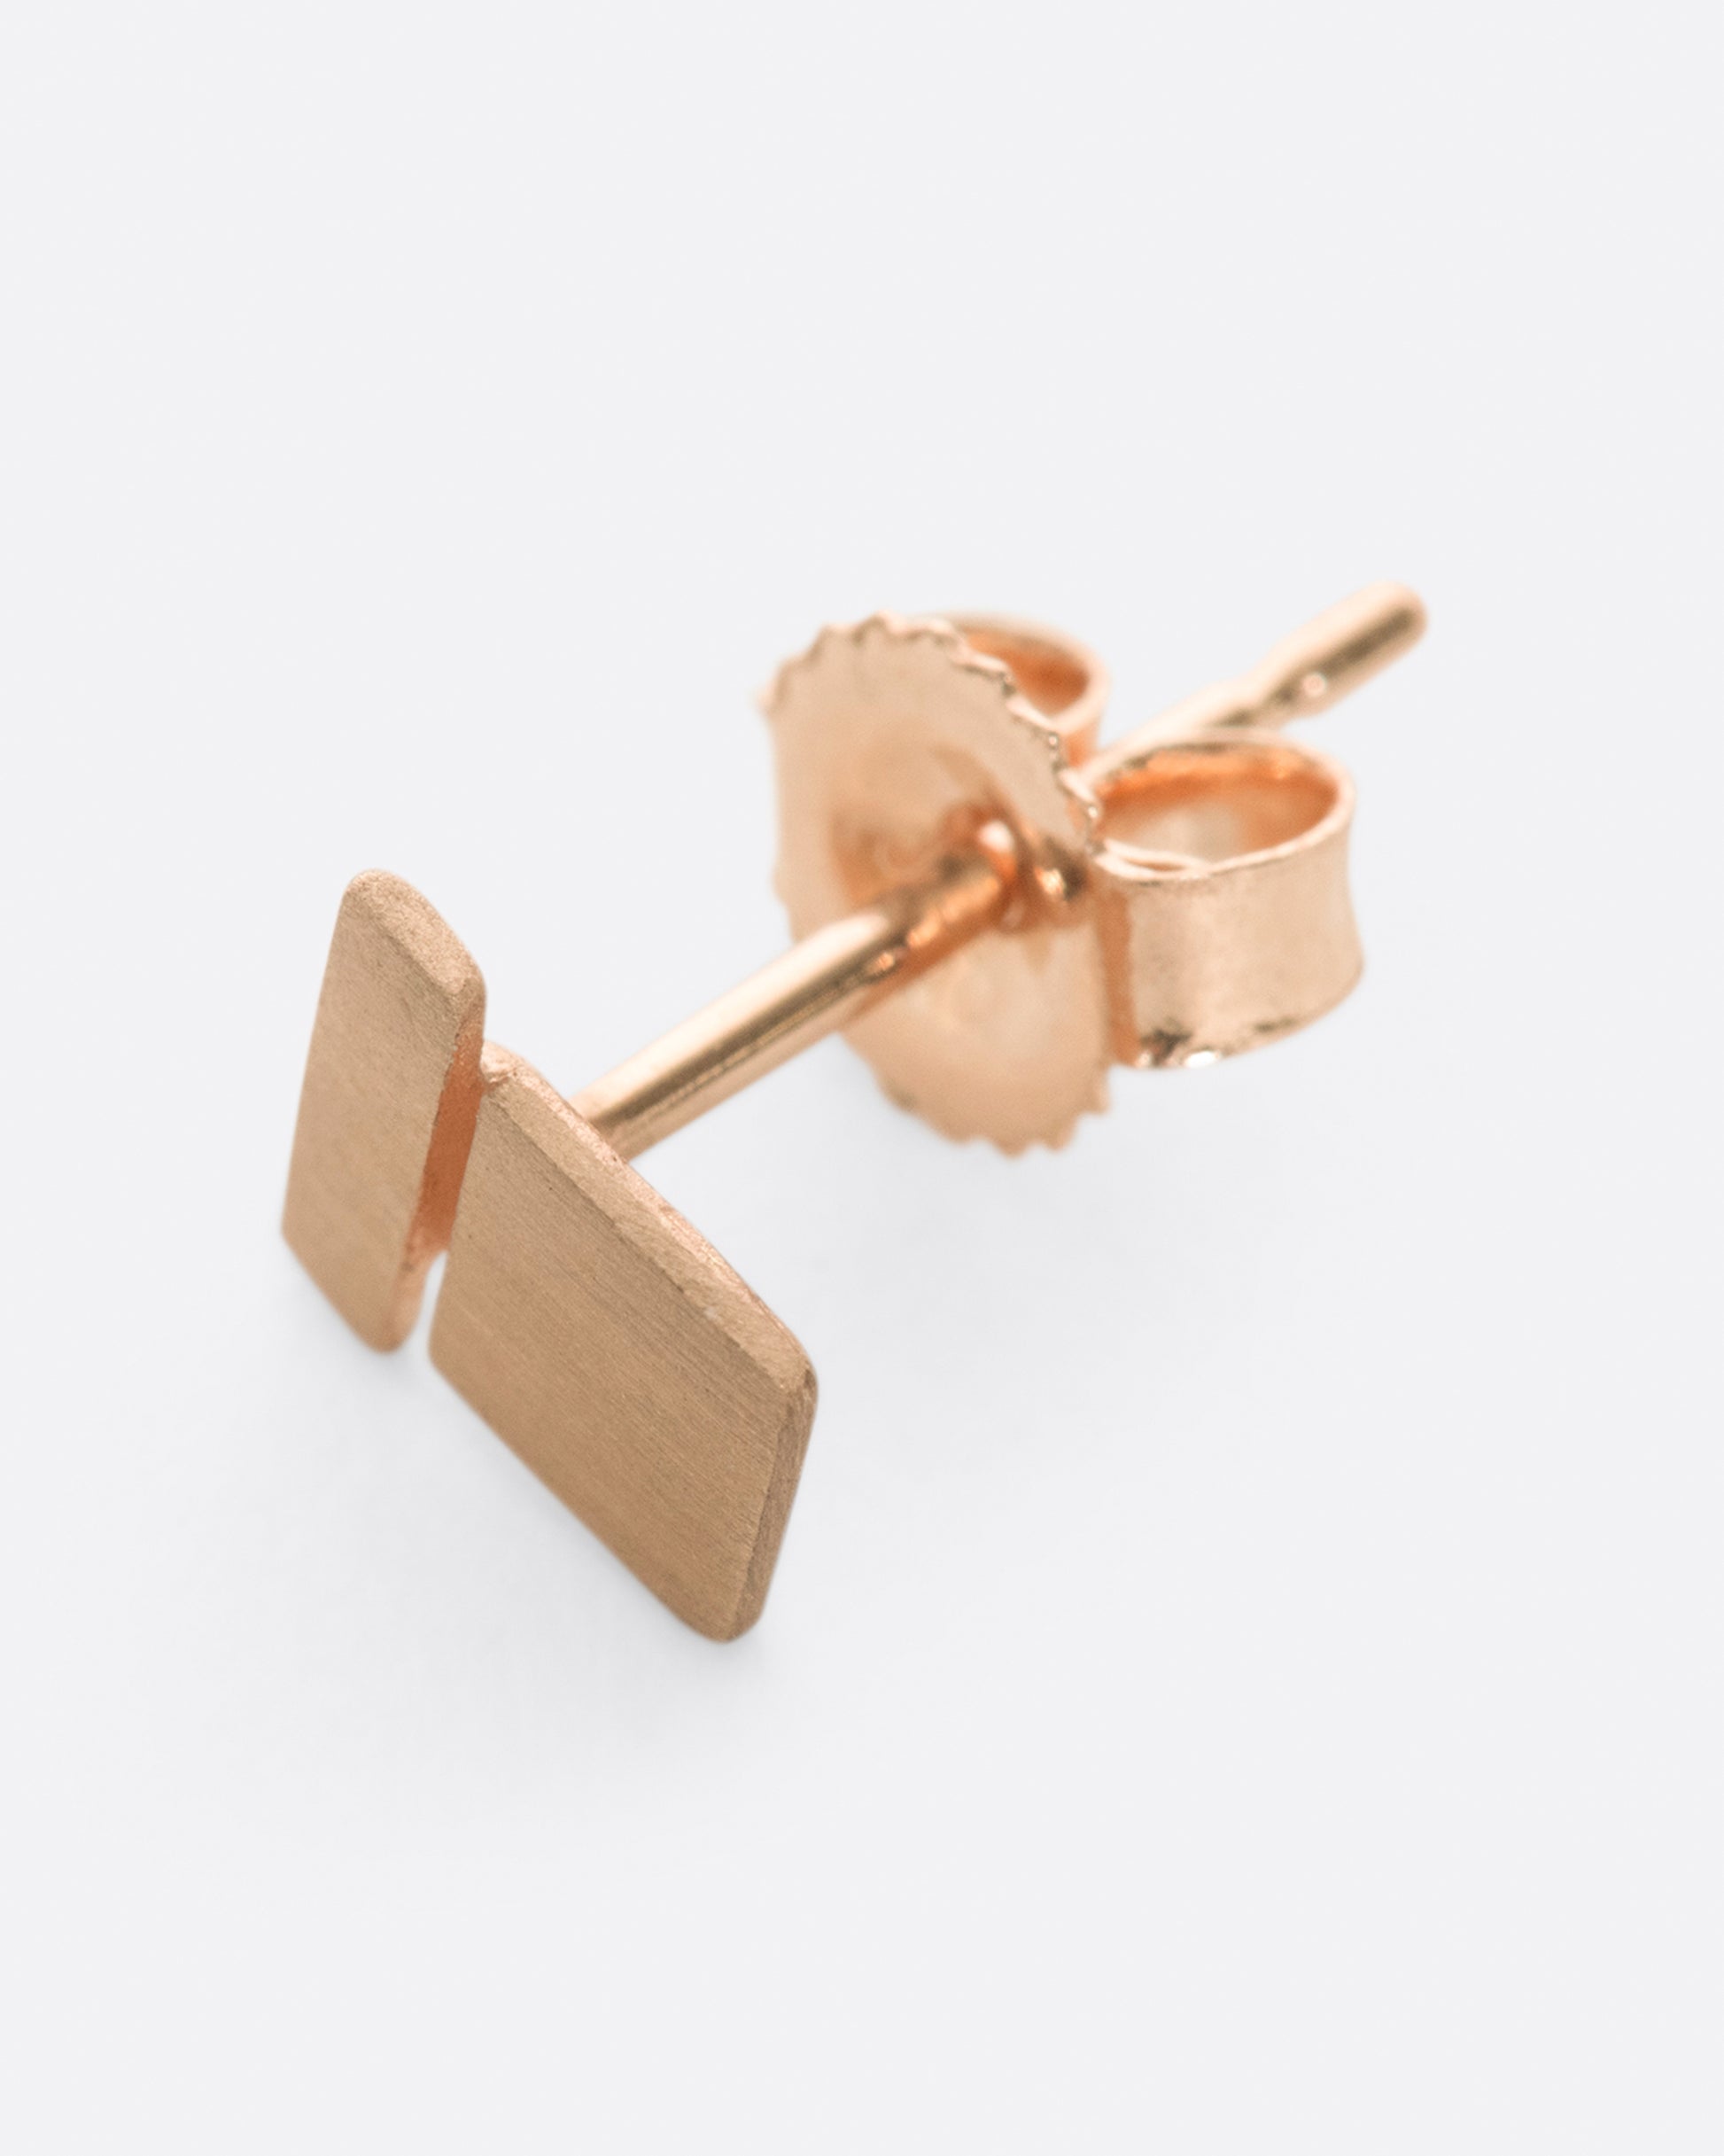 A matte rose gold geometric stud earring with a square stacked on a bar.